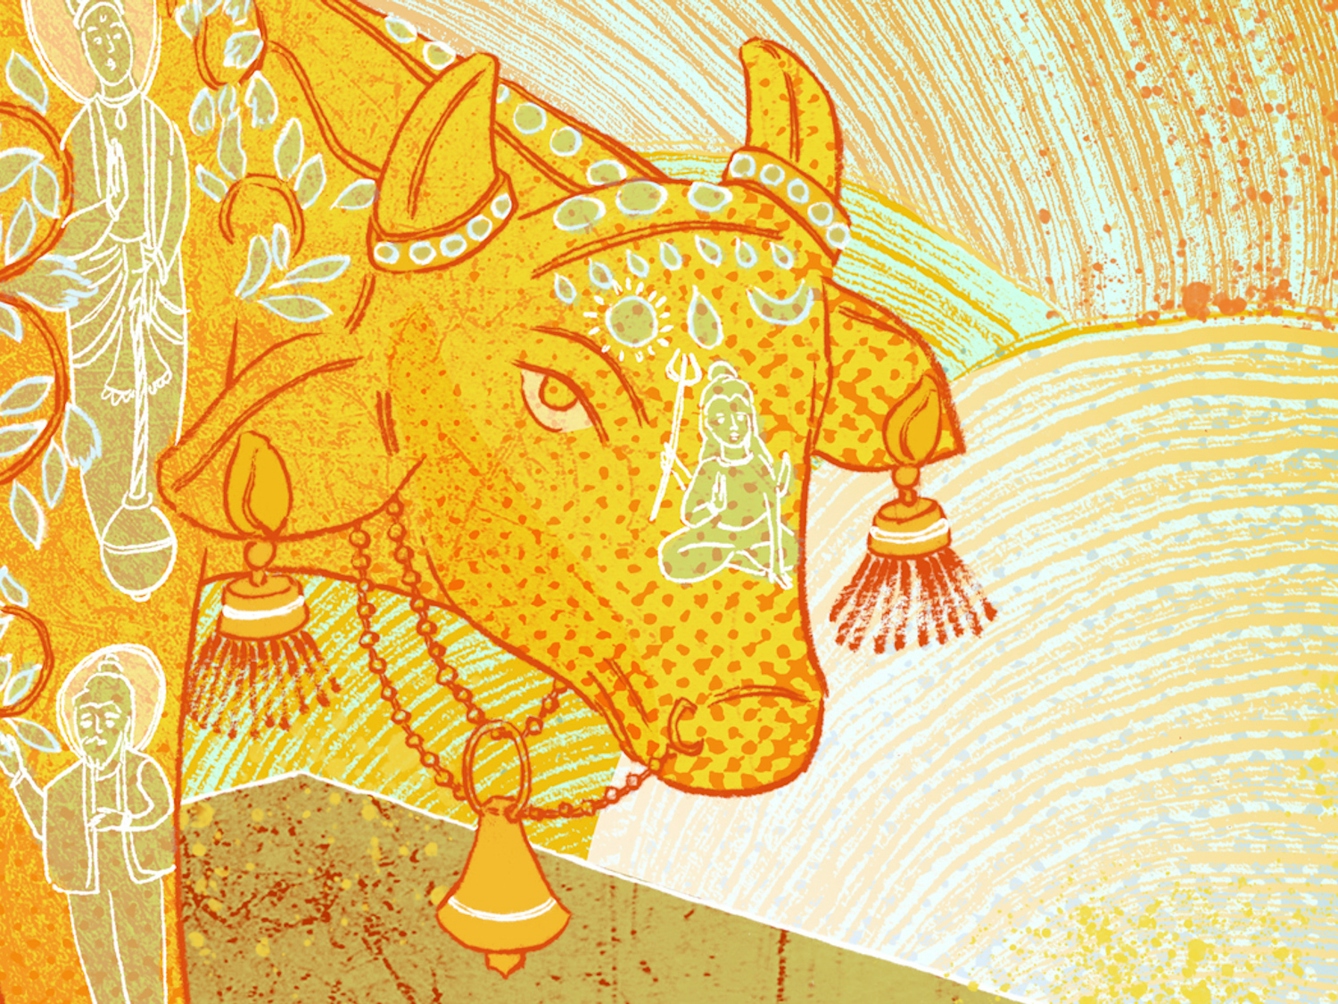 A digital illustration of Kamadhenu (the divine bovine goddess) depicted as a cow with illustrations of Hindu goddesses and other religious symbols painted on their hide. Around their neck is a bell on a chain, in the background are orange and yellow swirls representing butter. 